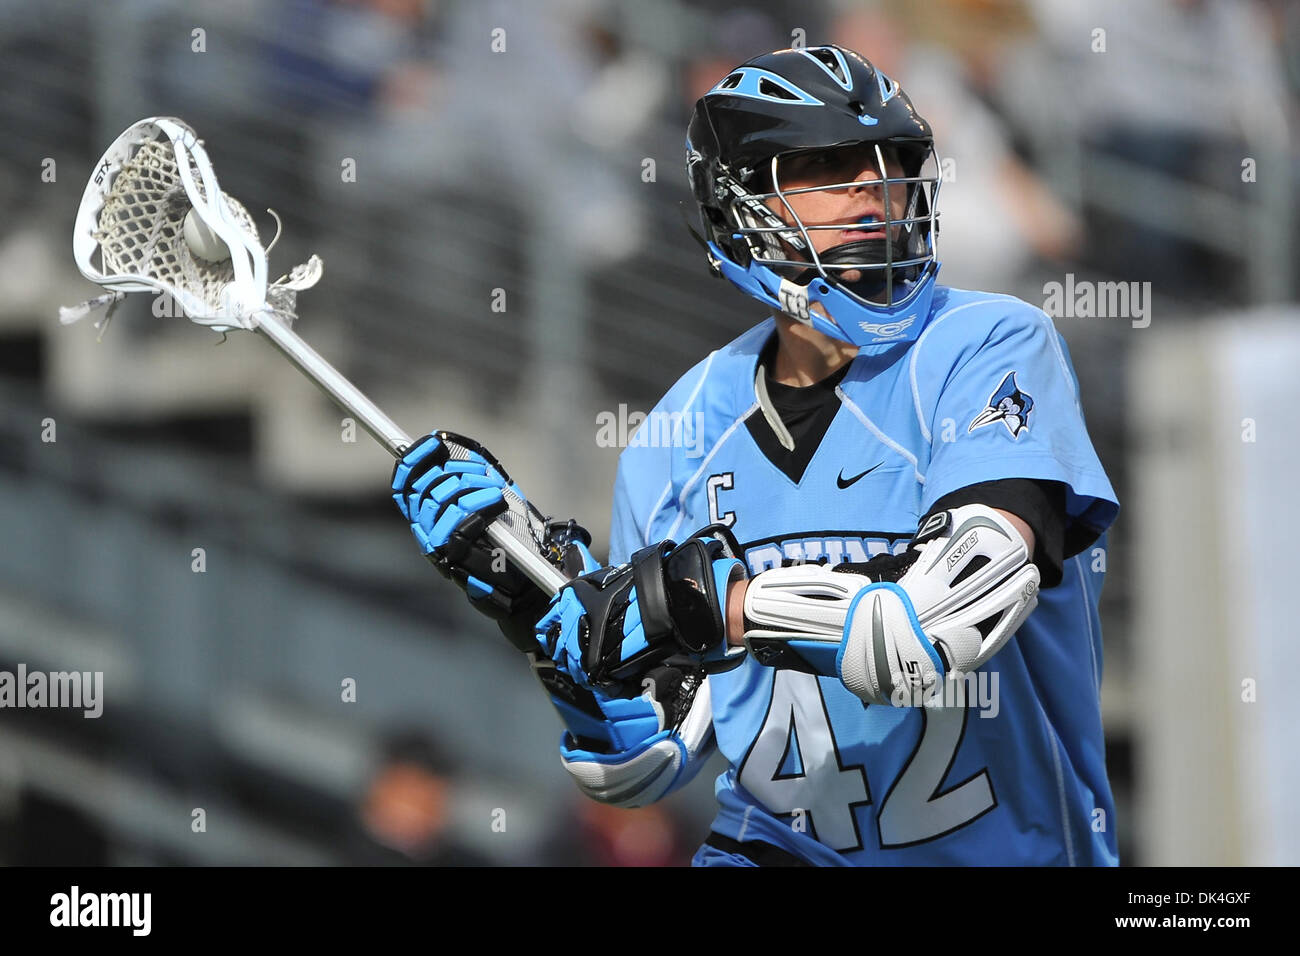 Apr. 3, 2011 - East Rutherford, New Jersey, U.S - Johns Hopkins Blue Jays Attackman Kyle Wharton (42) in action during the Konica Minolta Big City Classic at The New Meadowlands Stadium in East Rutherford New Jersey  Johns Hopkins defeats UNC 10 to 9 (Credit Image: © Brooks Von Arx/Southcreek Global/ZUMAPRESS.com) Stock Photo